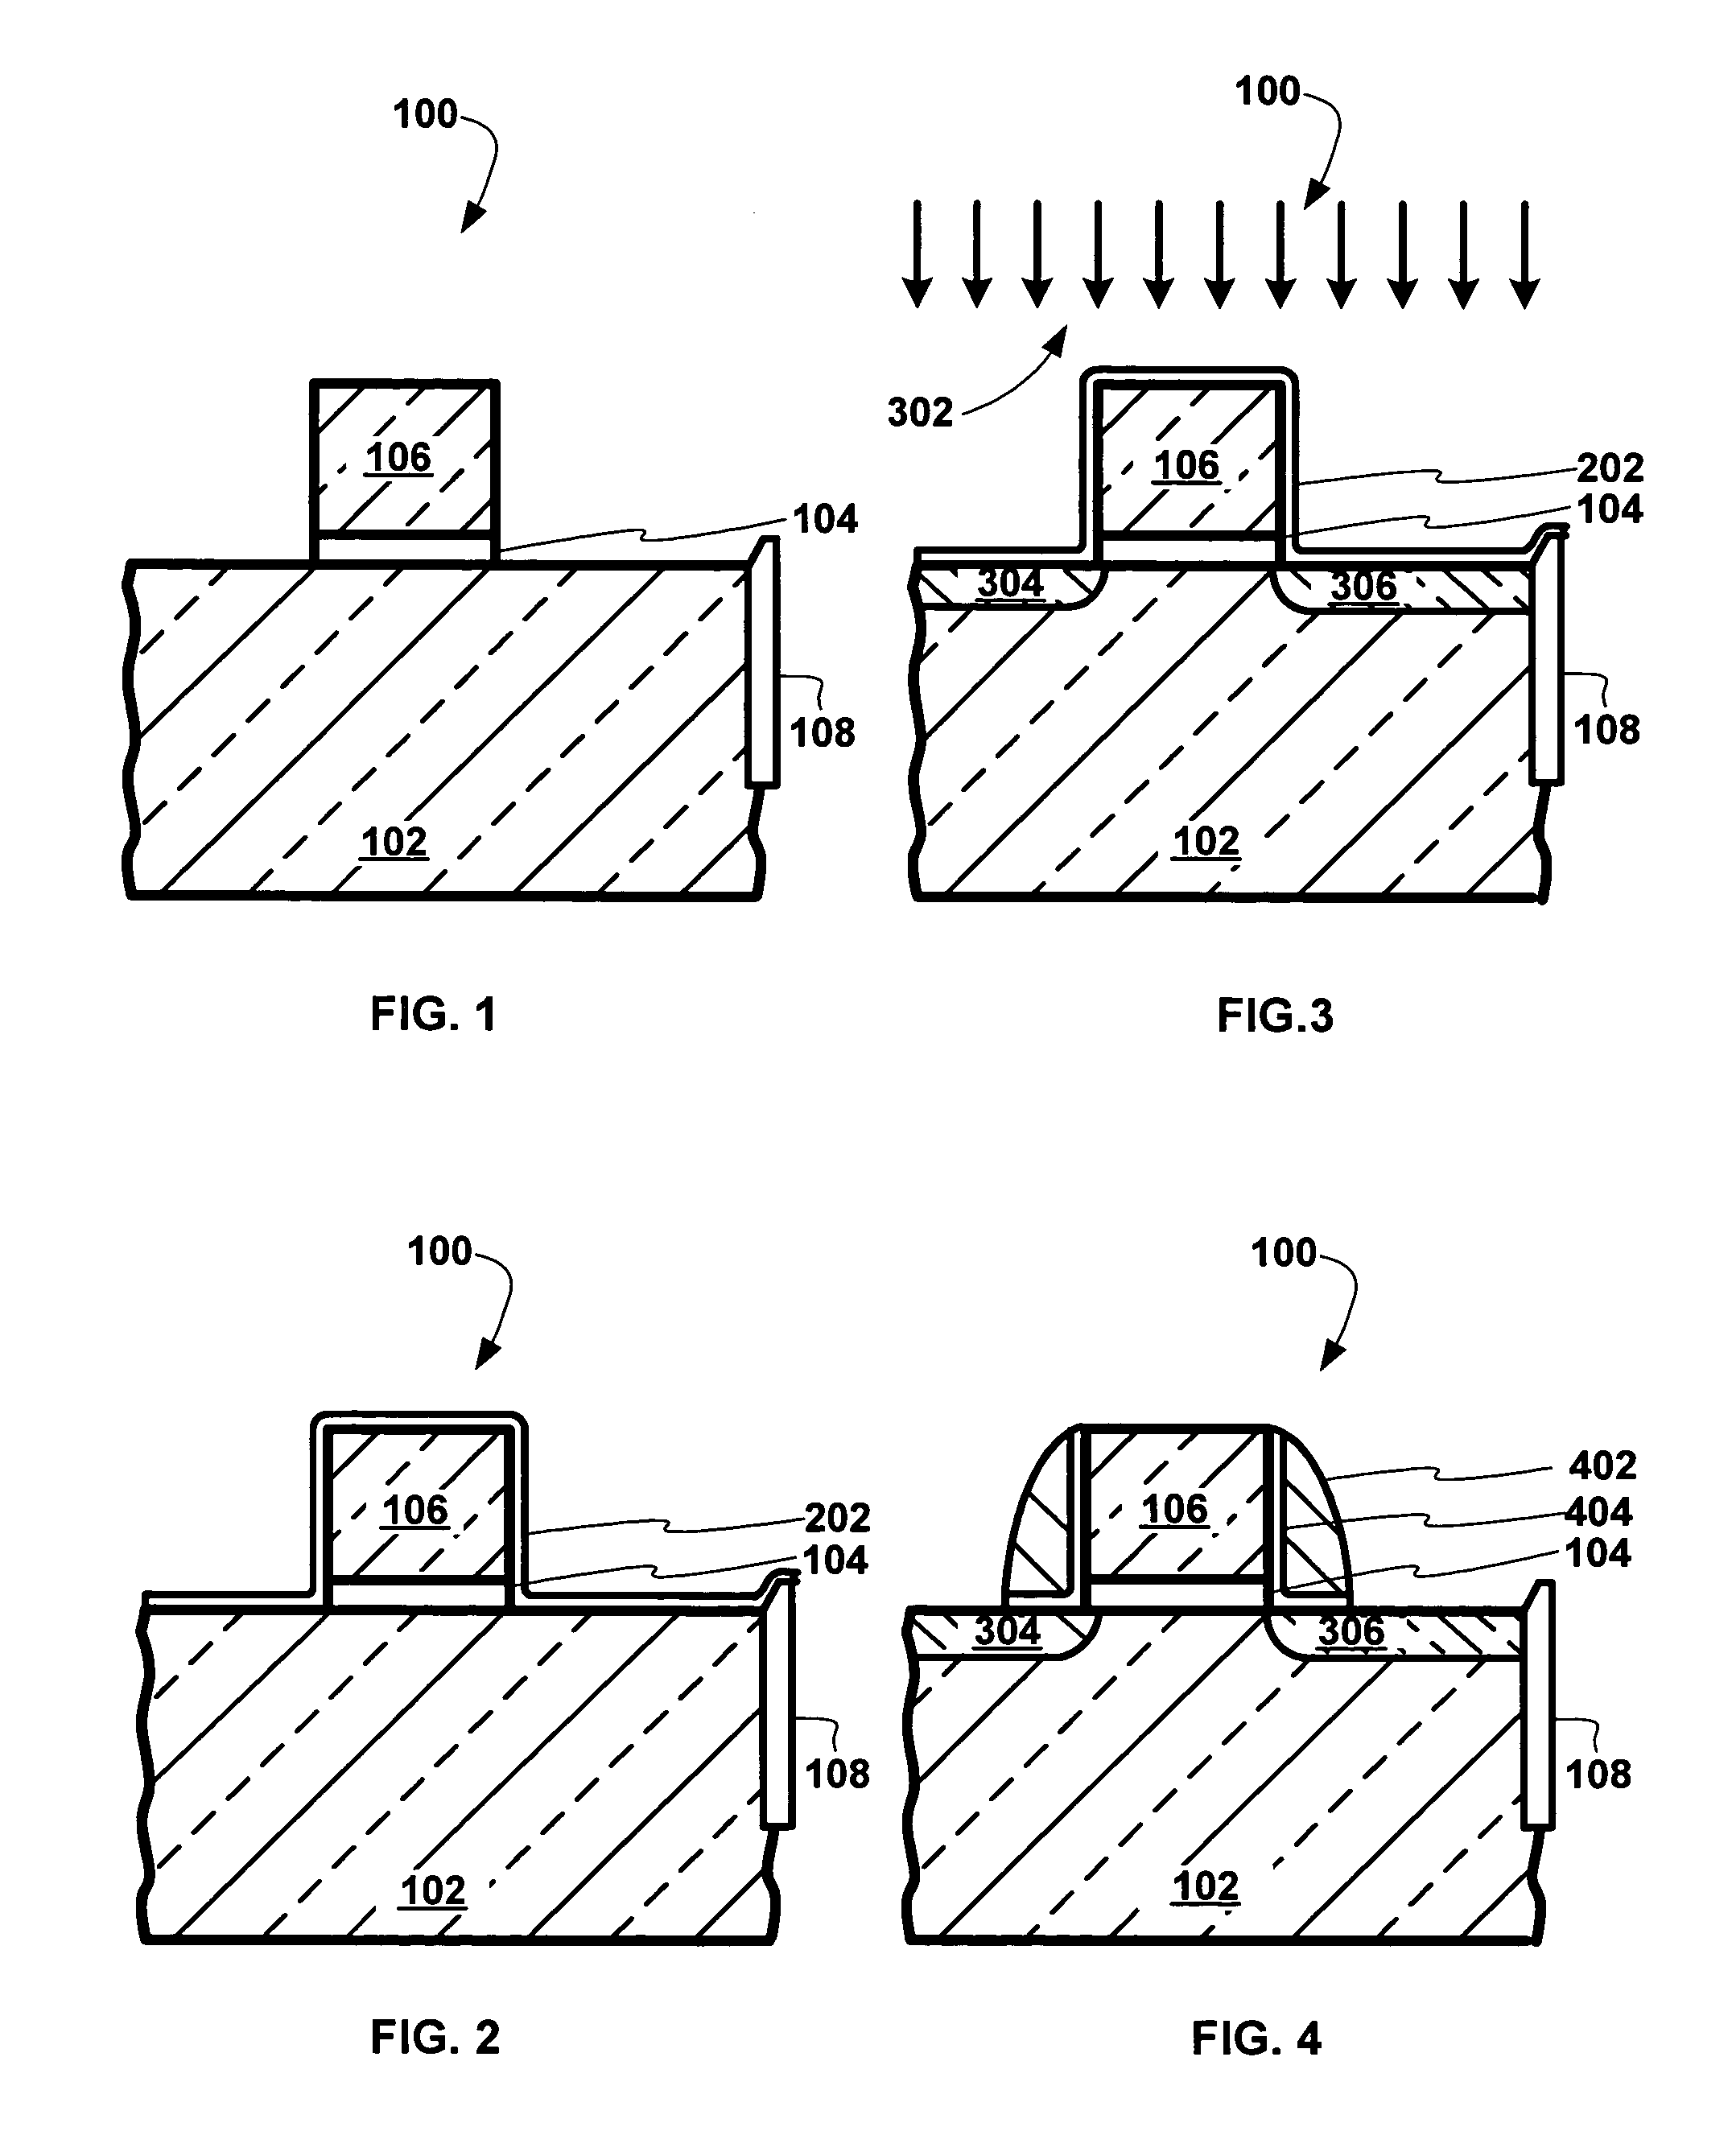 Multi-silicide in integrated circuit technology